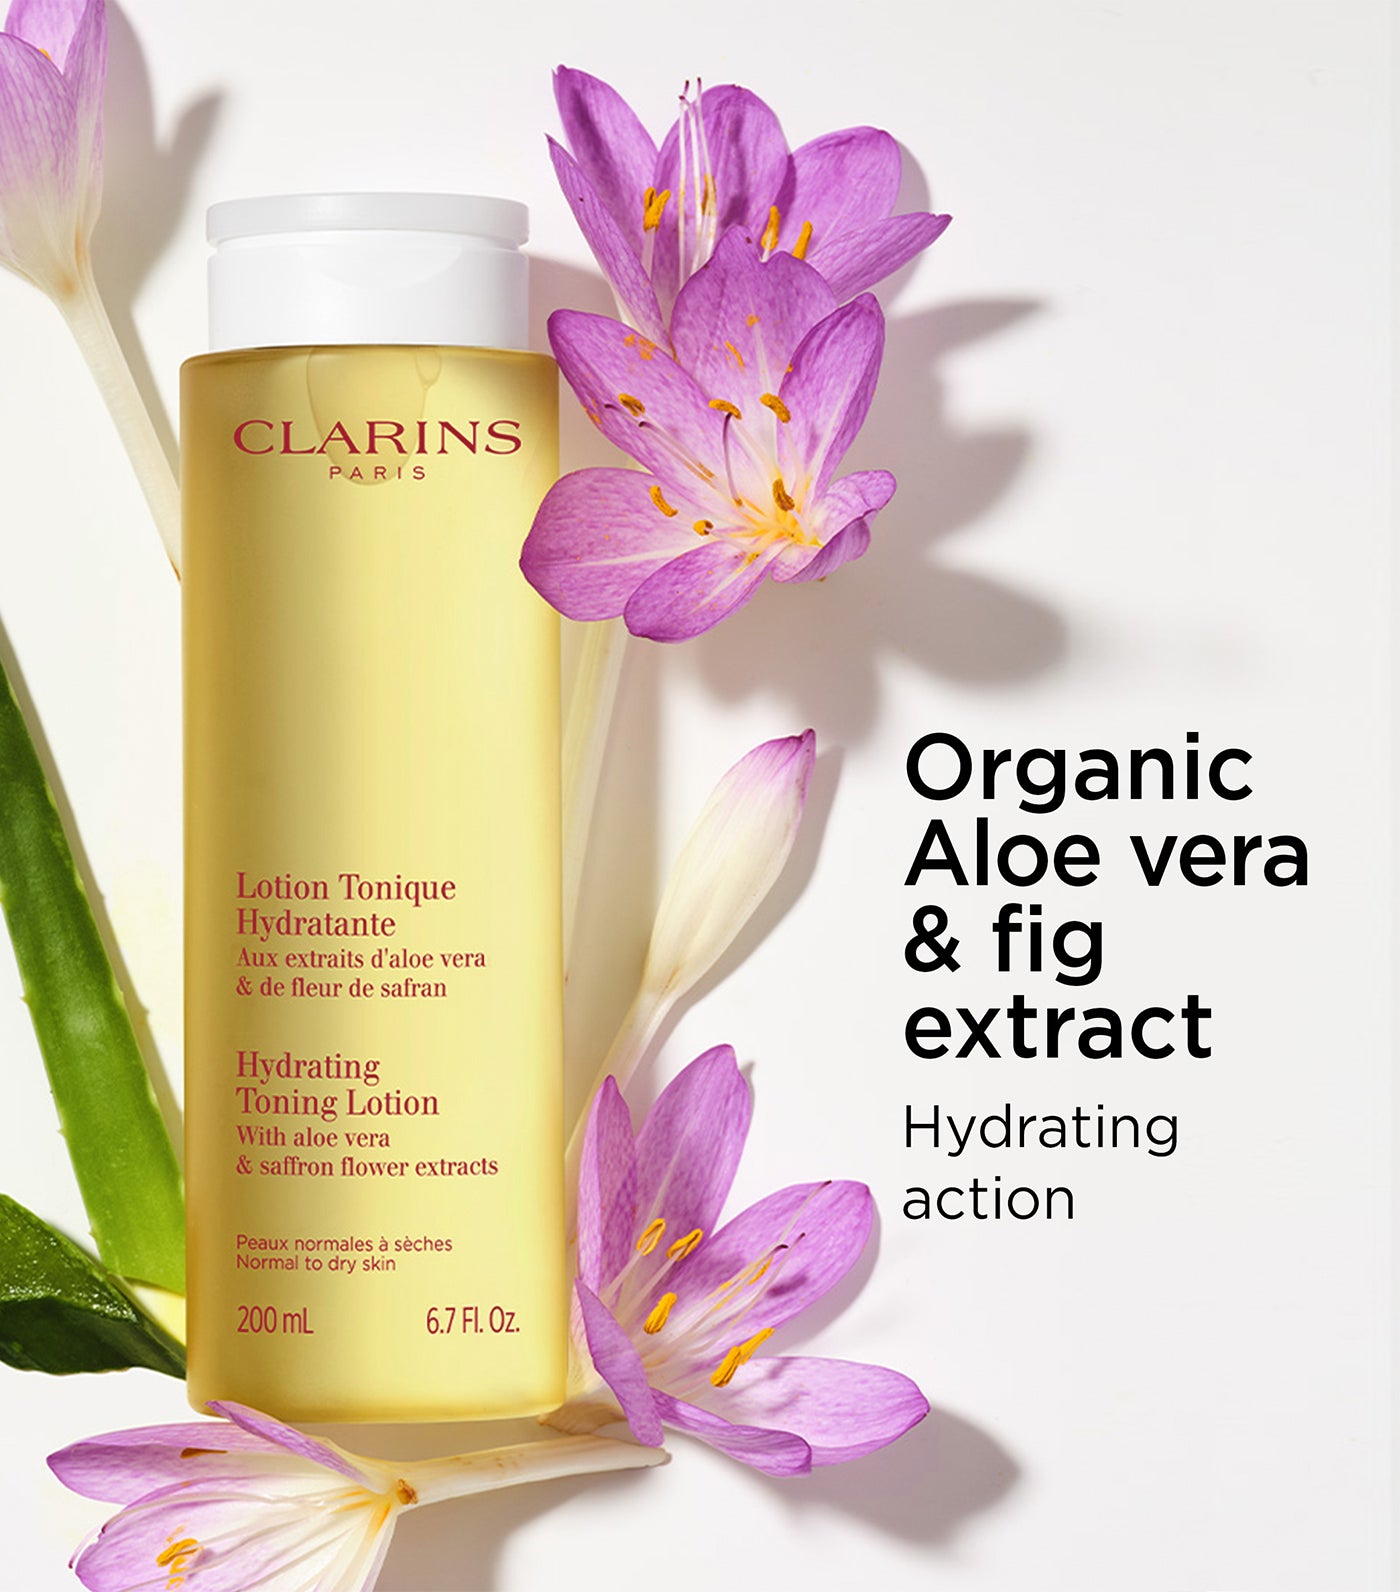 Hydrating Toning Lotion - For Normal to Dry Skin